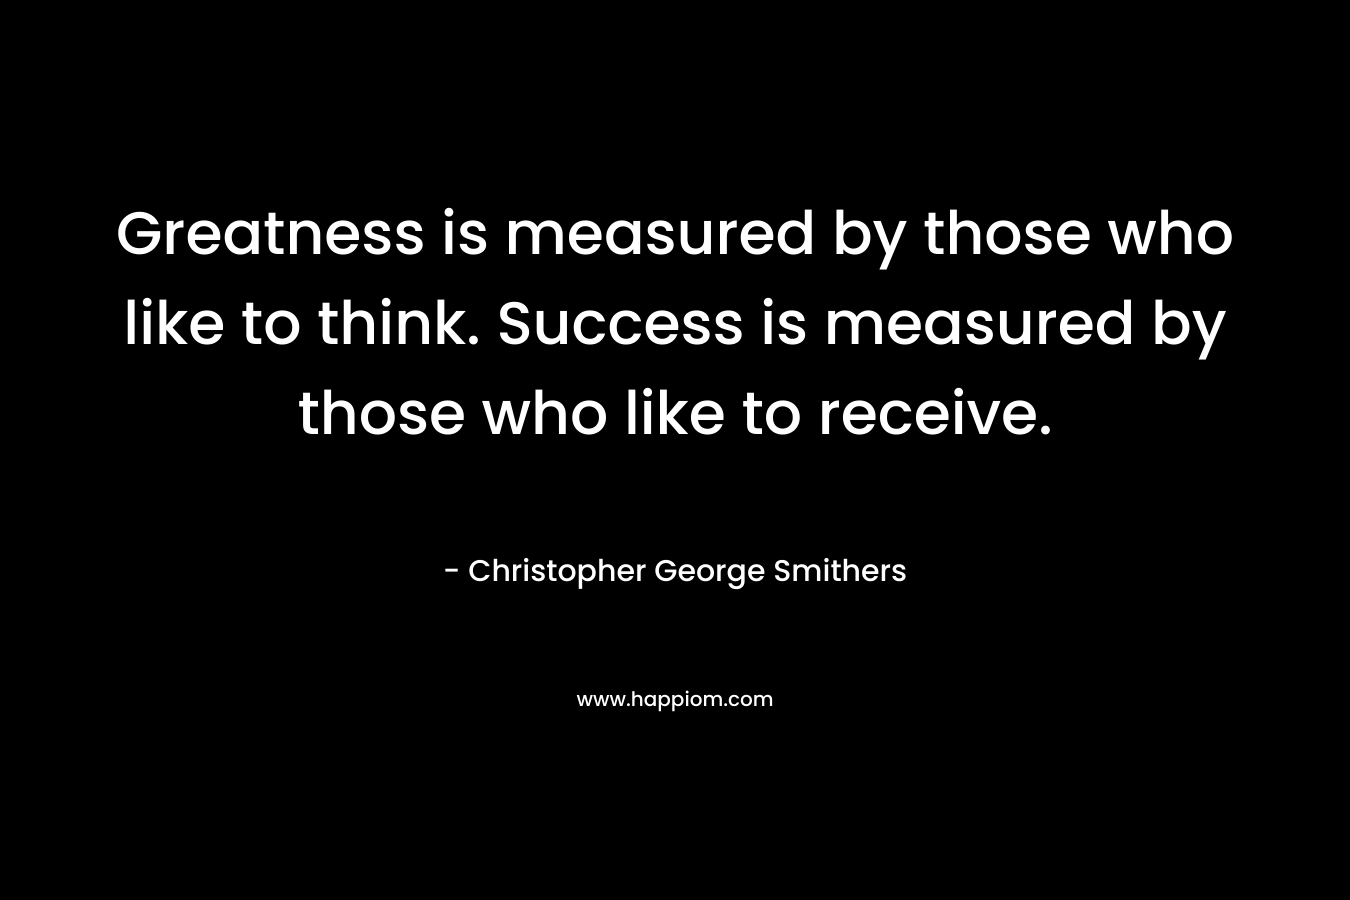 Greatness is measured by those who like to think. Success is measured by those who like to receive. – Christopher George Smithers